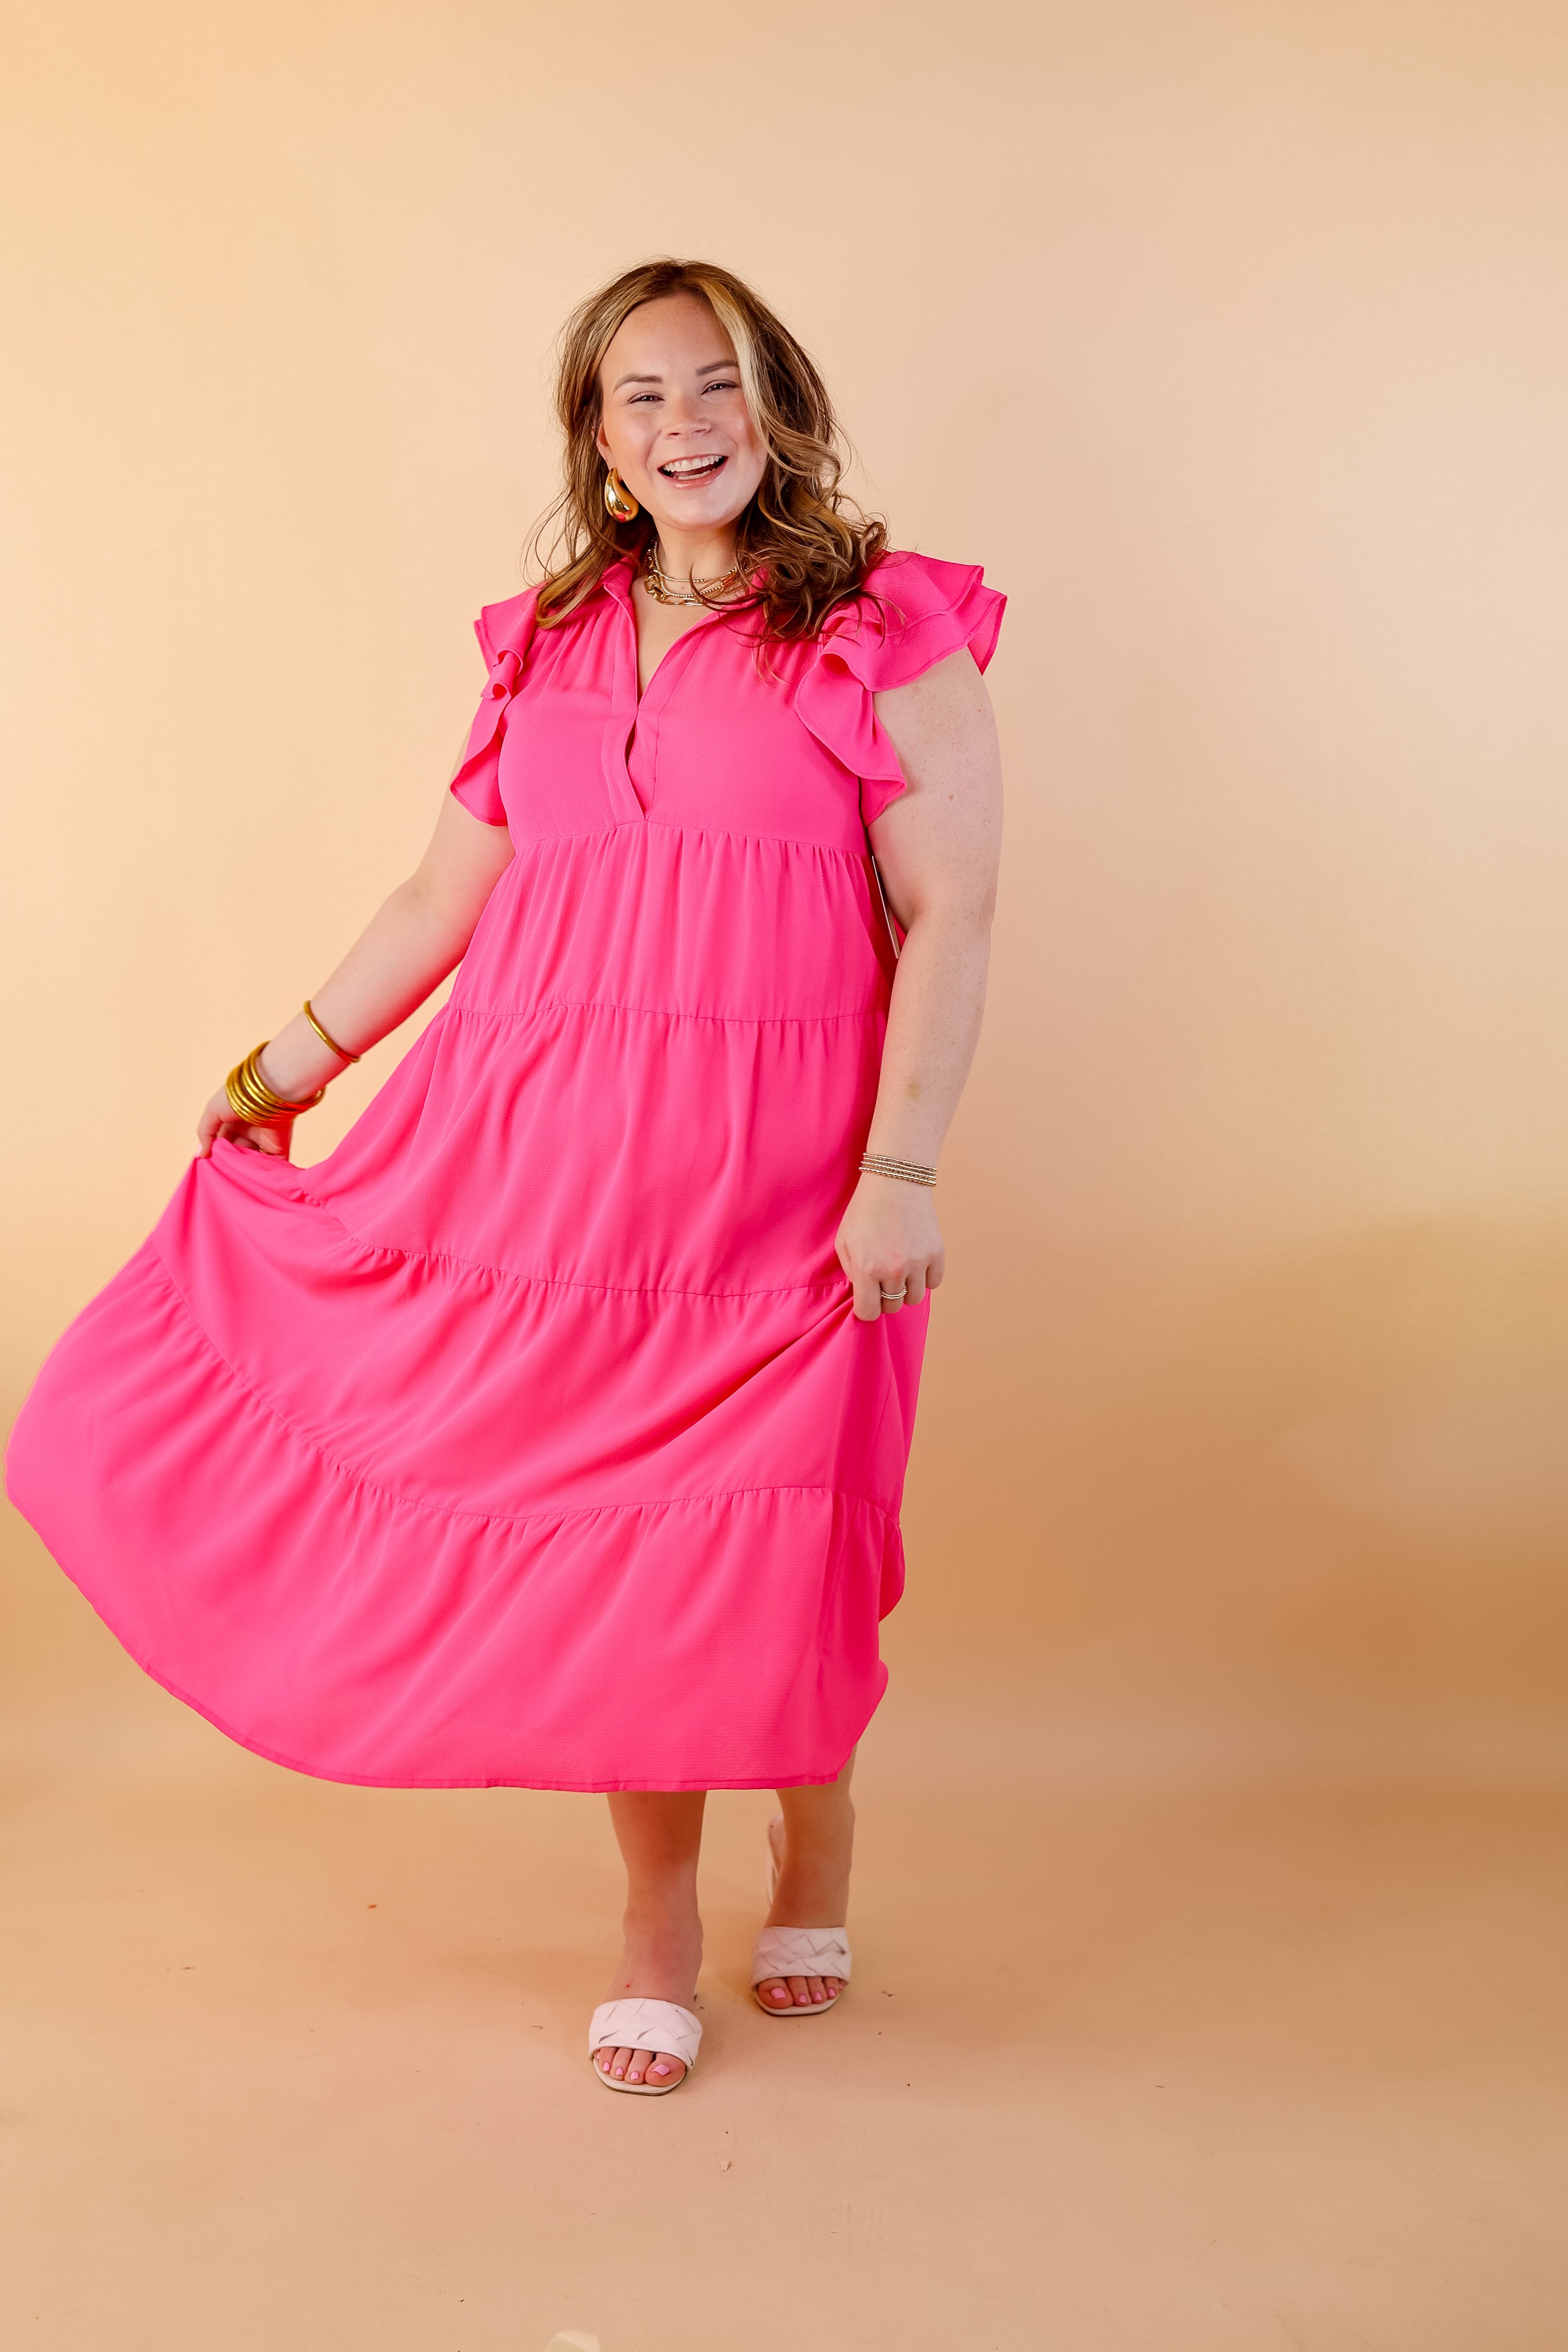 All Of A Sudden Tiered Midi Dress with Ruffle Cap Sleeves in Hot Pink - Giddy Up Glamour Boutique